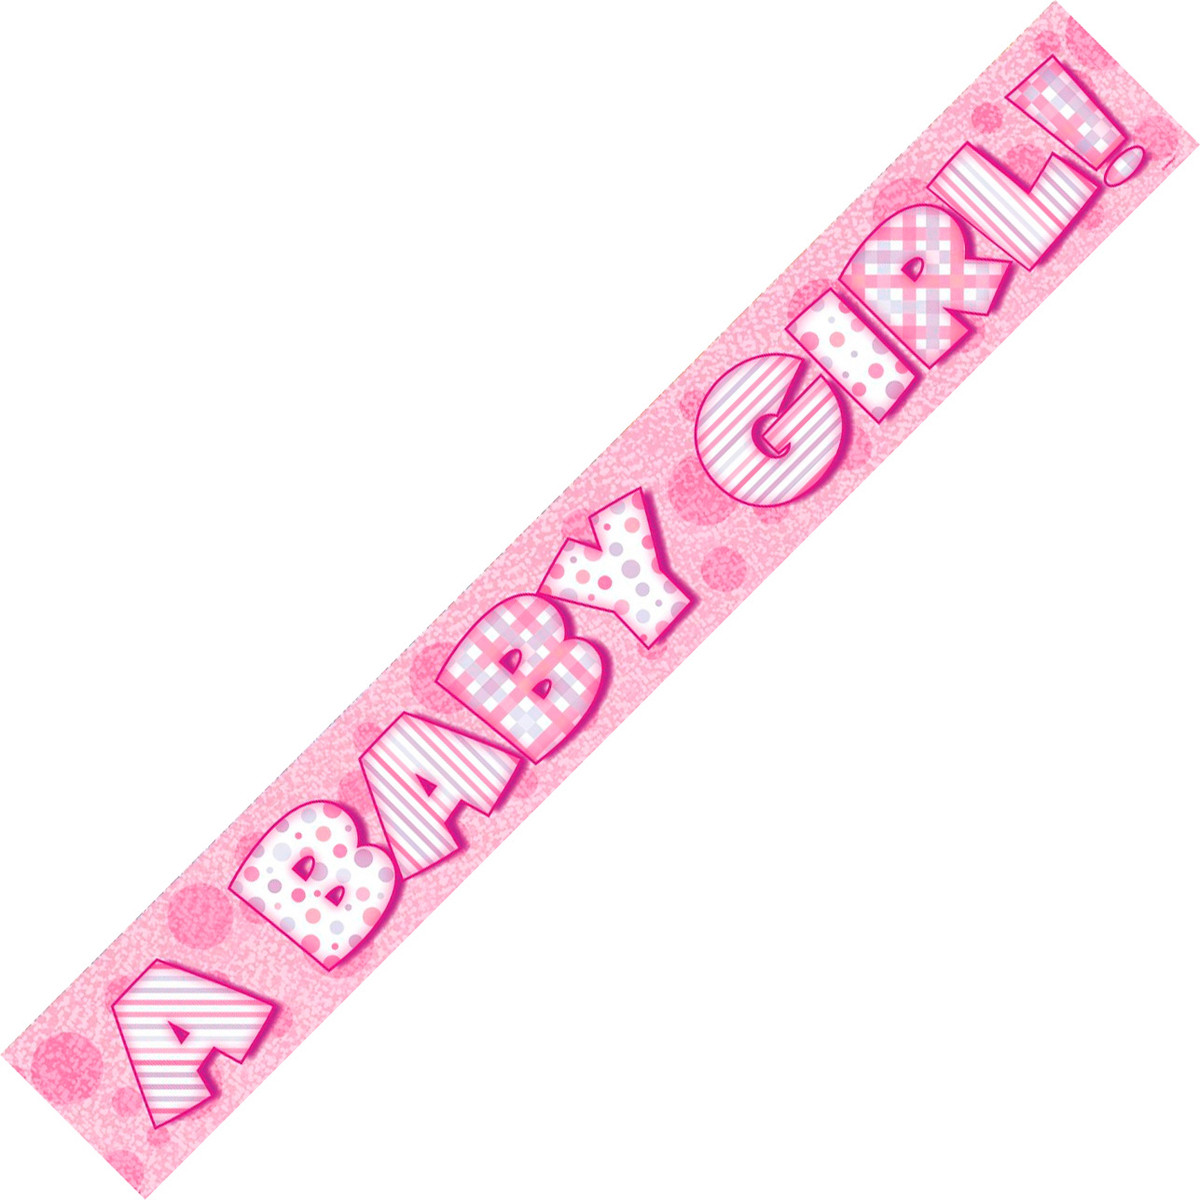 A Baby Girl Baby Shower Prismatic Foil Banner 3.65m